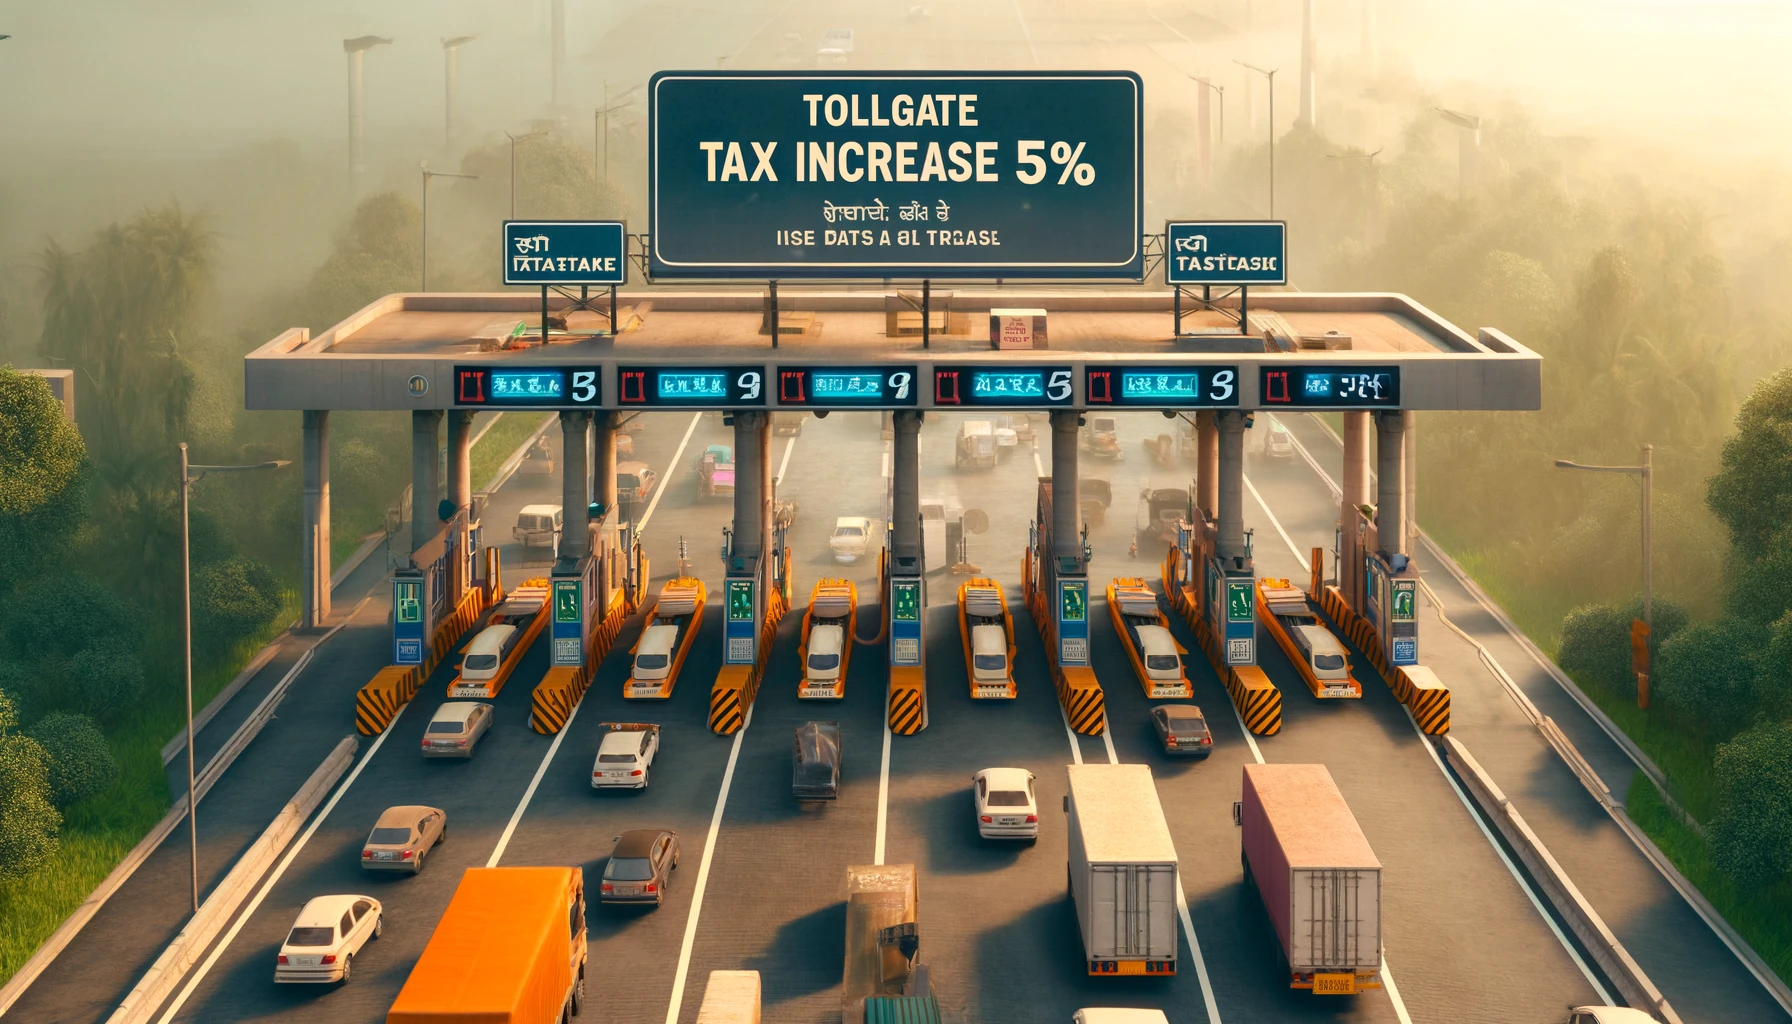 how the 5% toll rate increase on India's national highways from June 3, 2024, impacts travelers and transporters. Learn about the surge in toll collections, FASTag adoption, and the growth of tolled roads, supporting essential infrastructure development." how the 5% toll rate increase on India's national highways from June 3, 2024, impacts travelers and transporters. Learn about the surge in toll collections, FASTag adoption, and the growth of tolled roads, supporting essential infrastructure development.